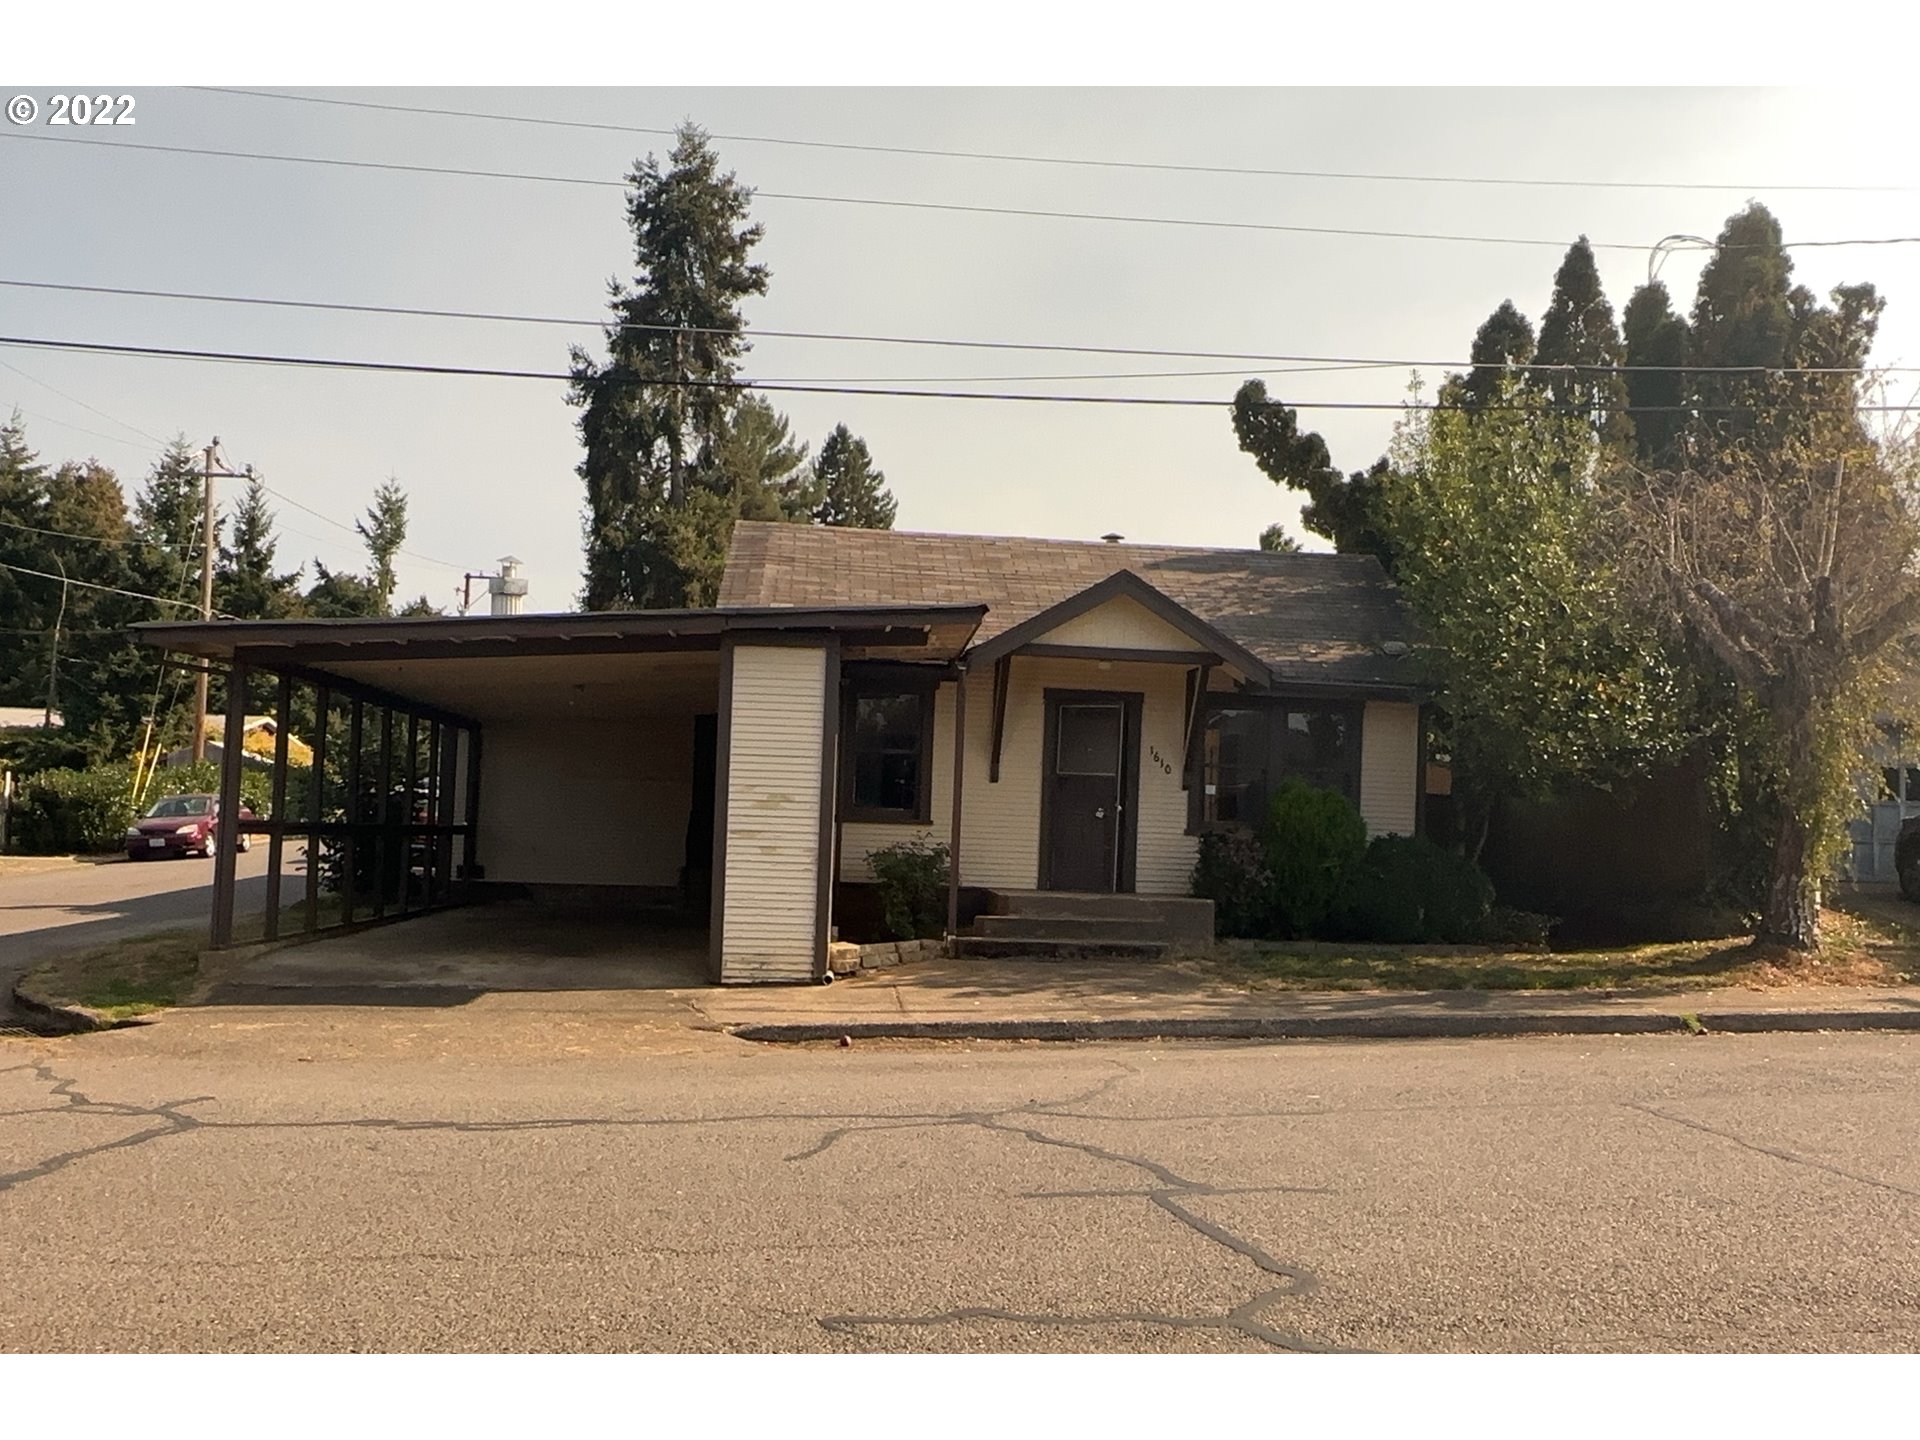 Investor Alert! 1-level home on corner lot. Lots of sq. footage for the money. Fenced backyard. Large carport. Close to Harrison Elementary and the Pool/Aquatic Center.